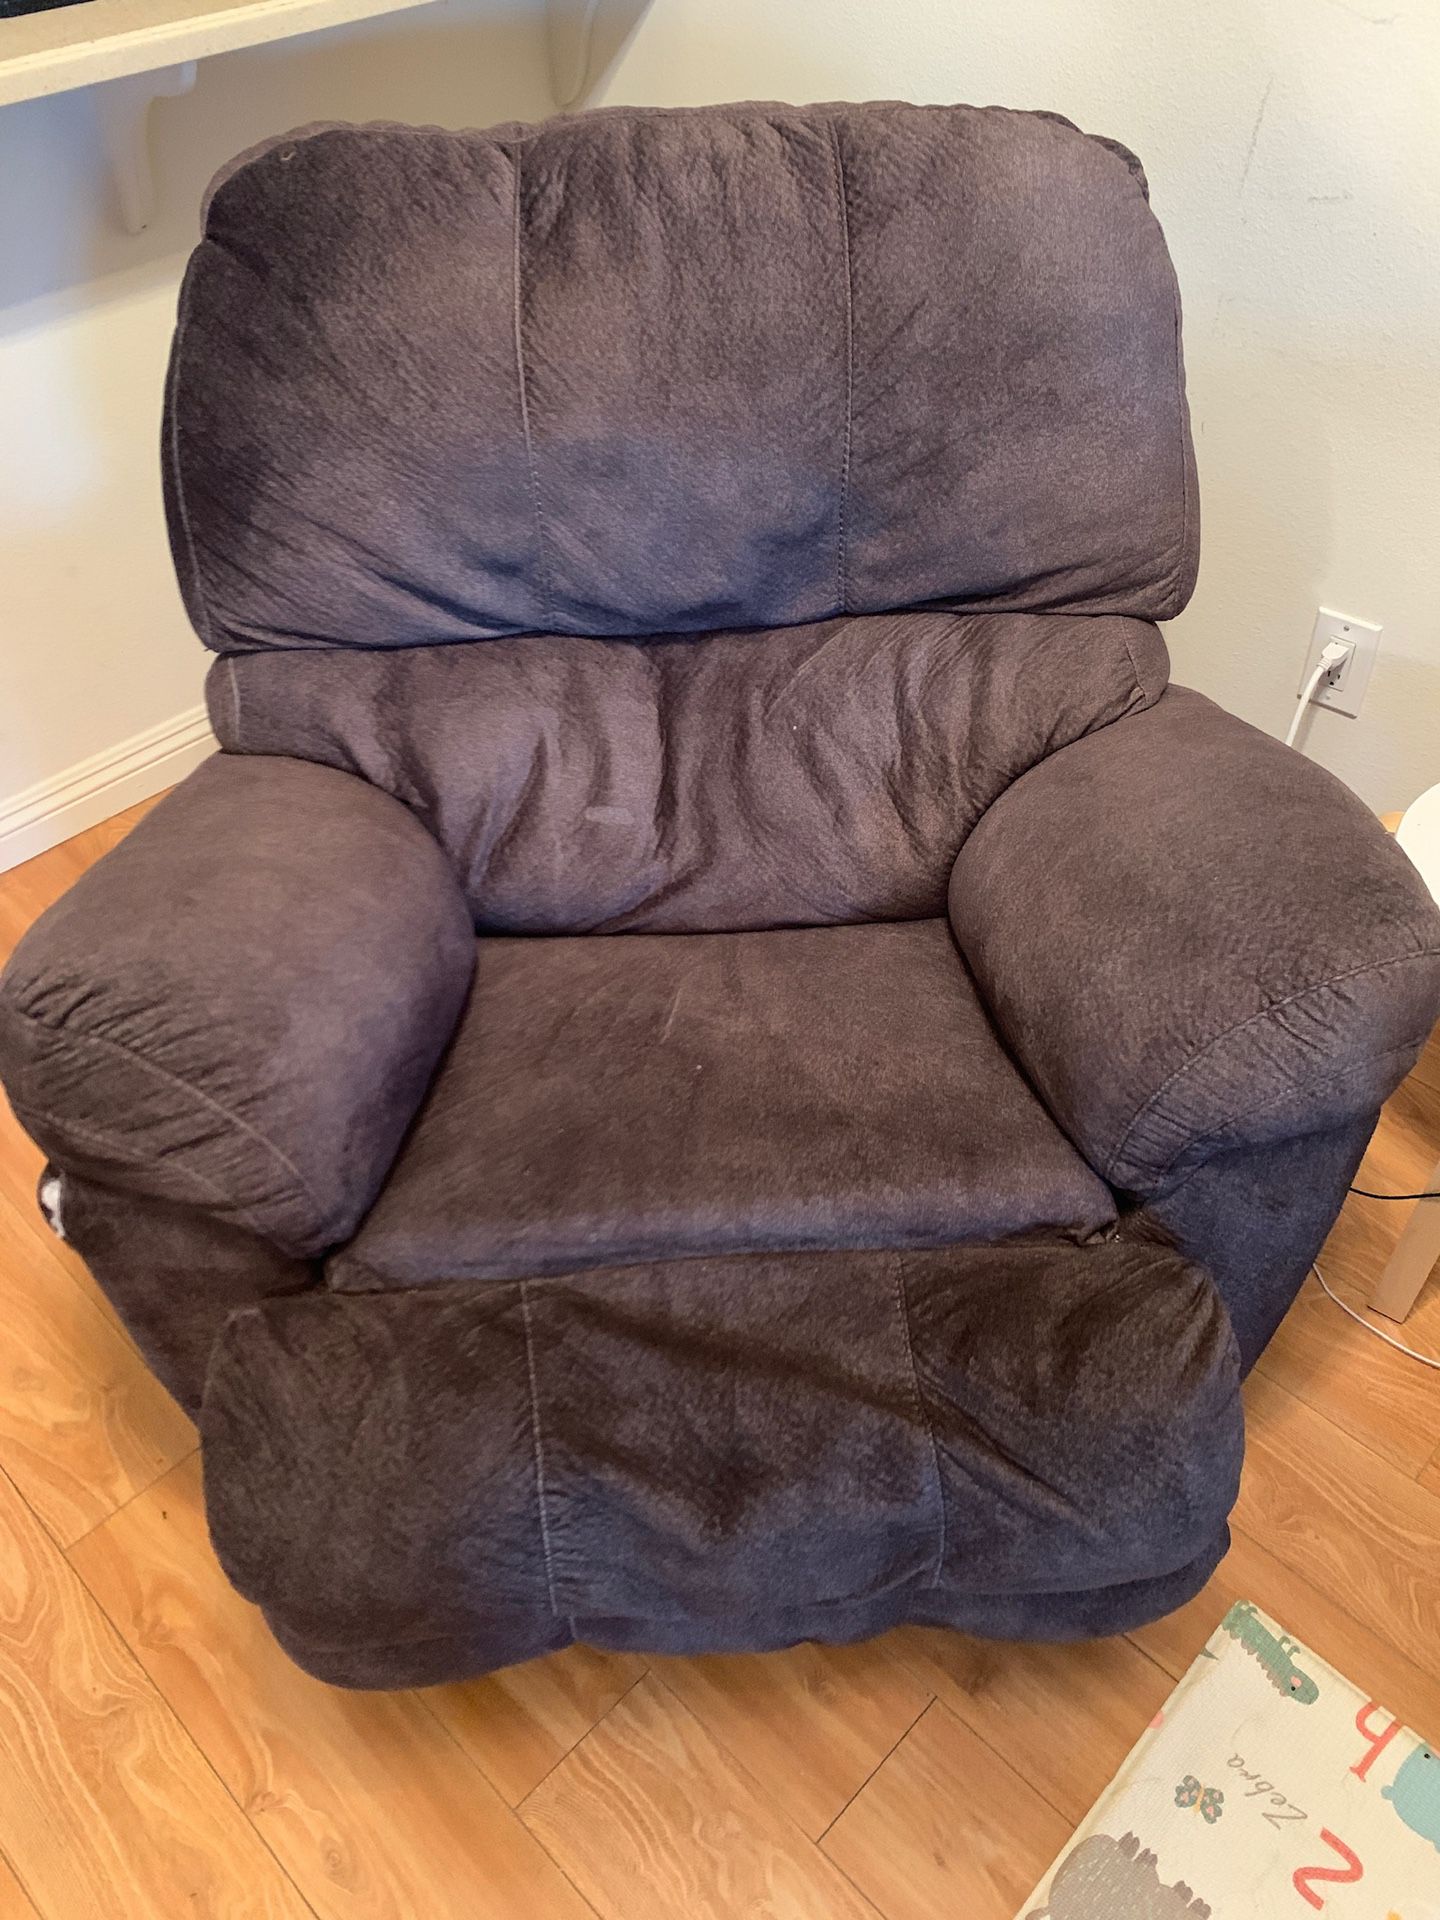 Recliner. Has a small tear in corner. Needs to be sold by the end of the month. Pick up after Nov.28